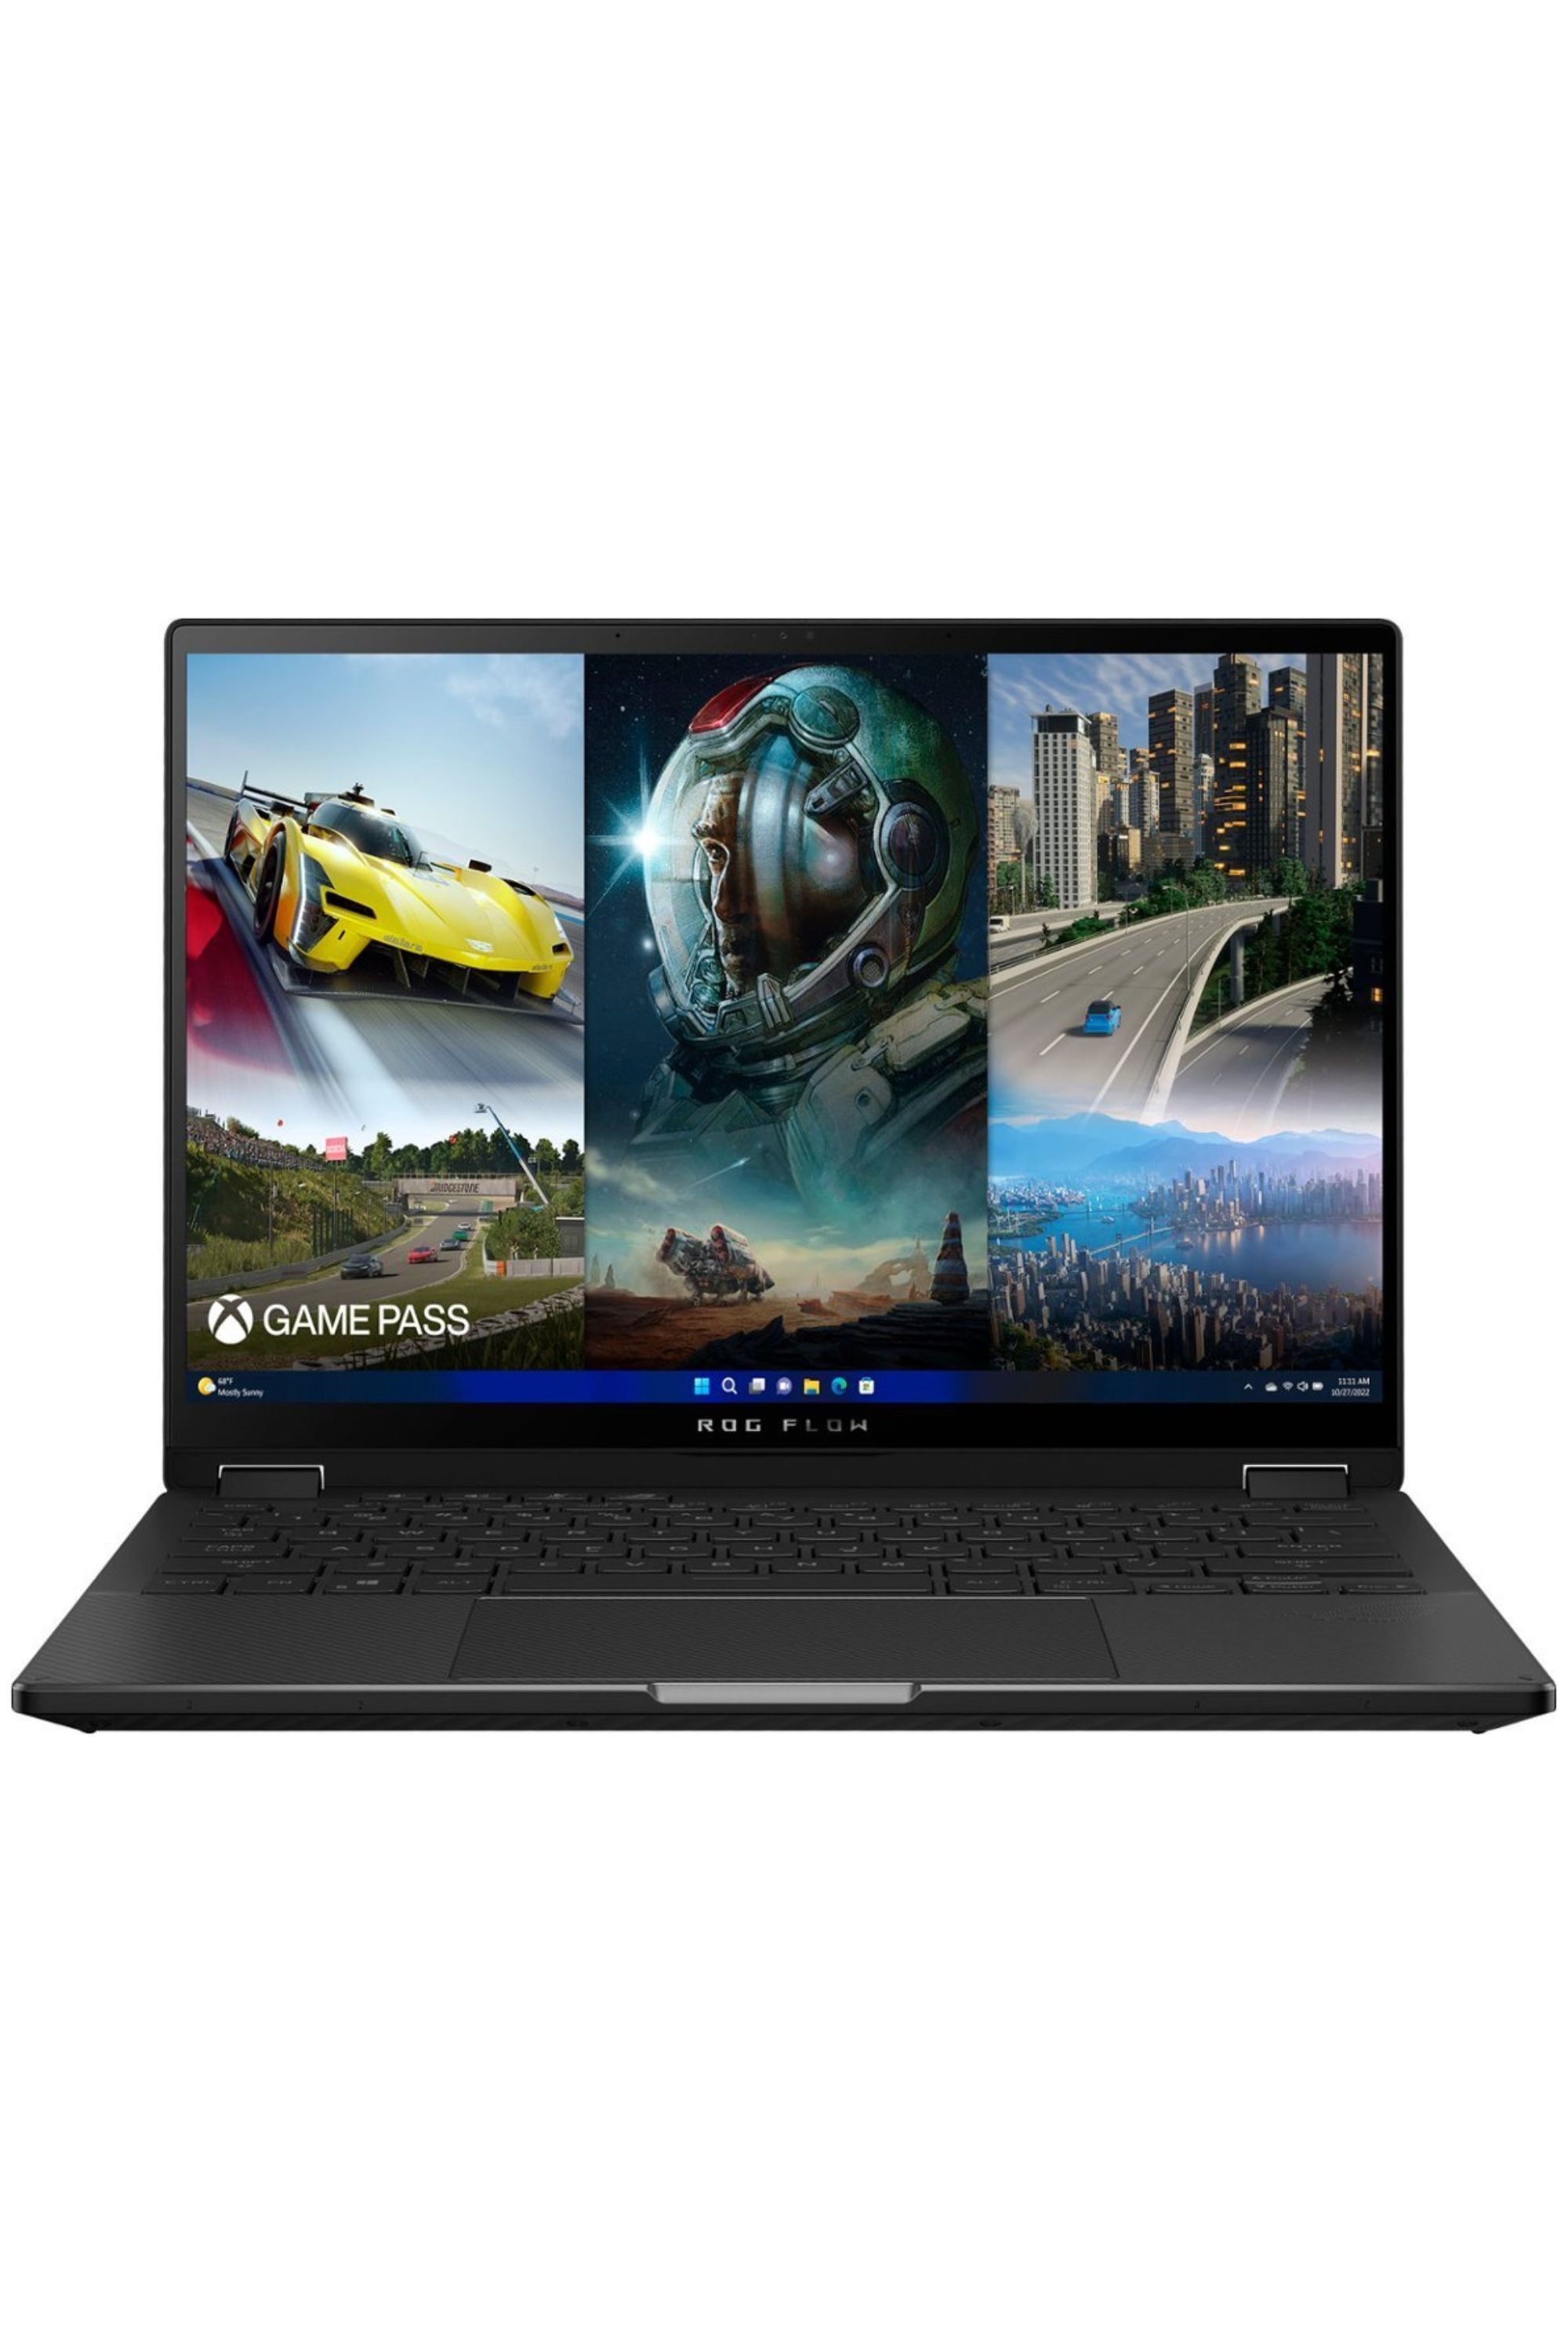 Best Buy Offers Massive Discounts On Asus Gaming Laptops